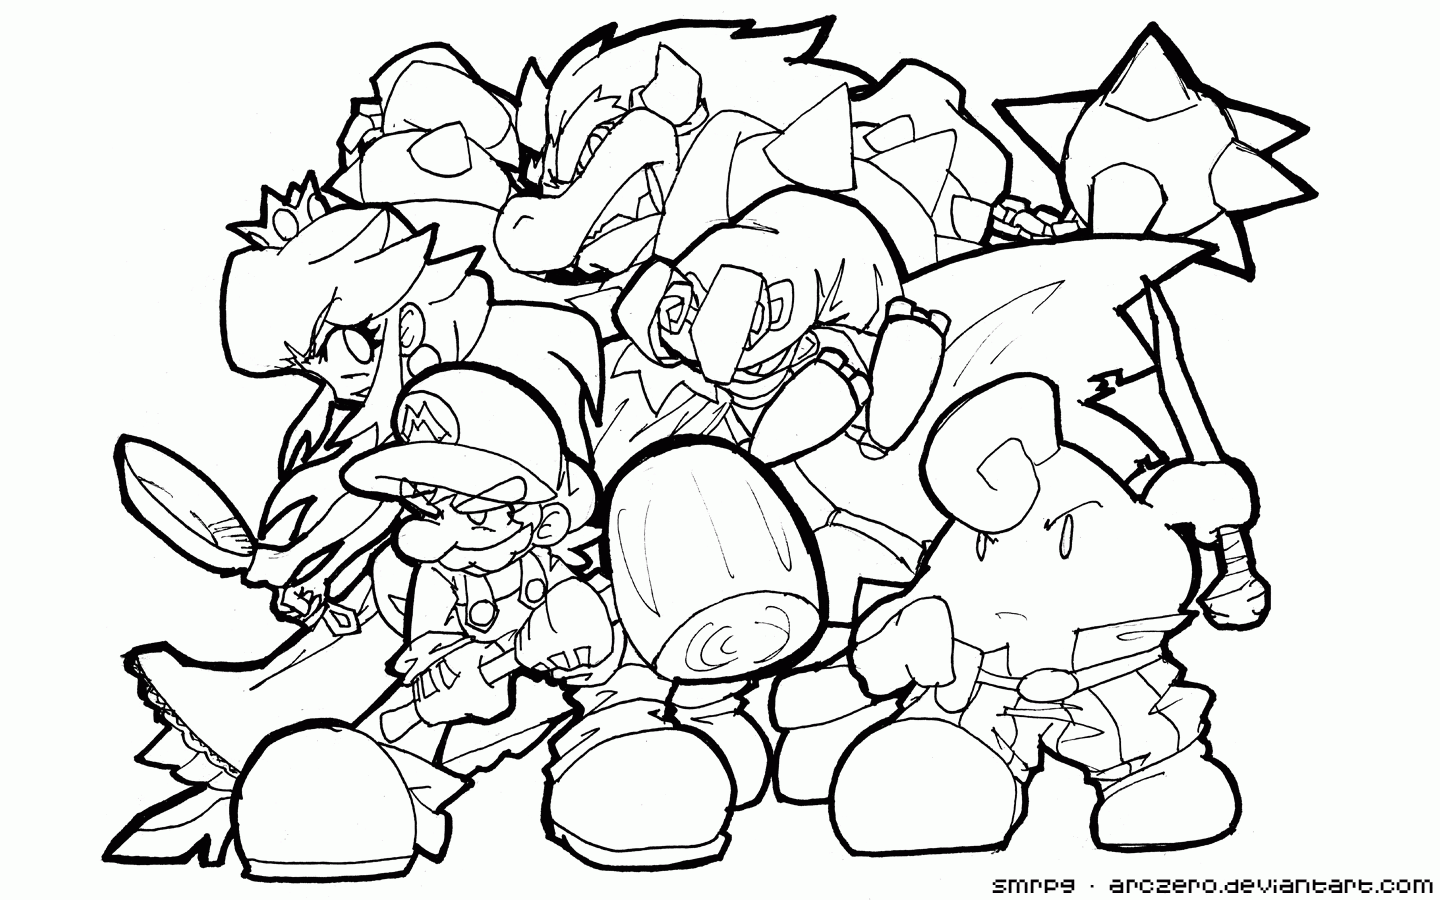 126 Cute Mario Fire Flower Coloring Pages with Animal character